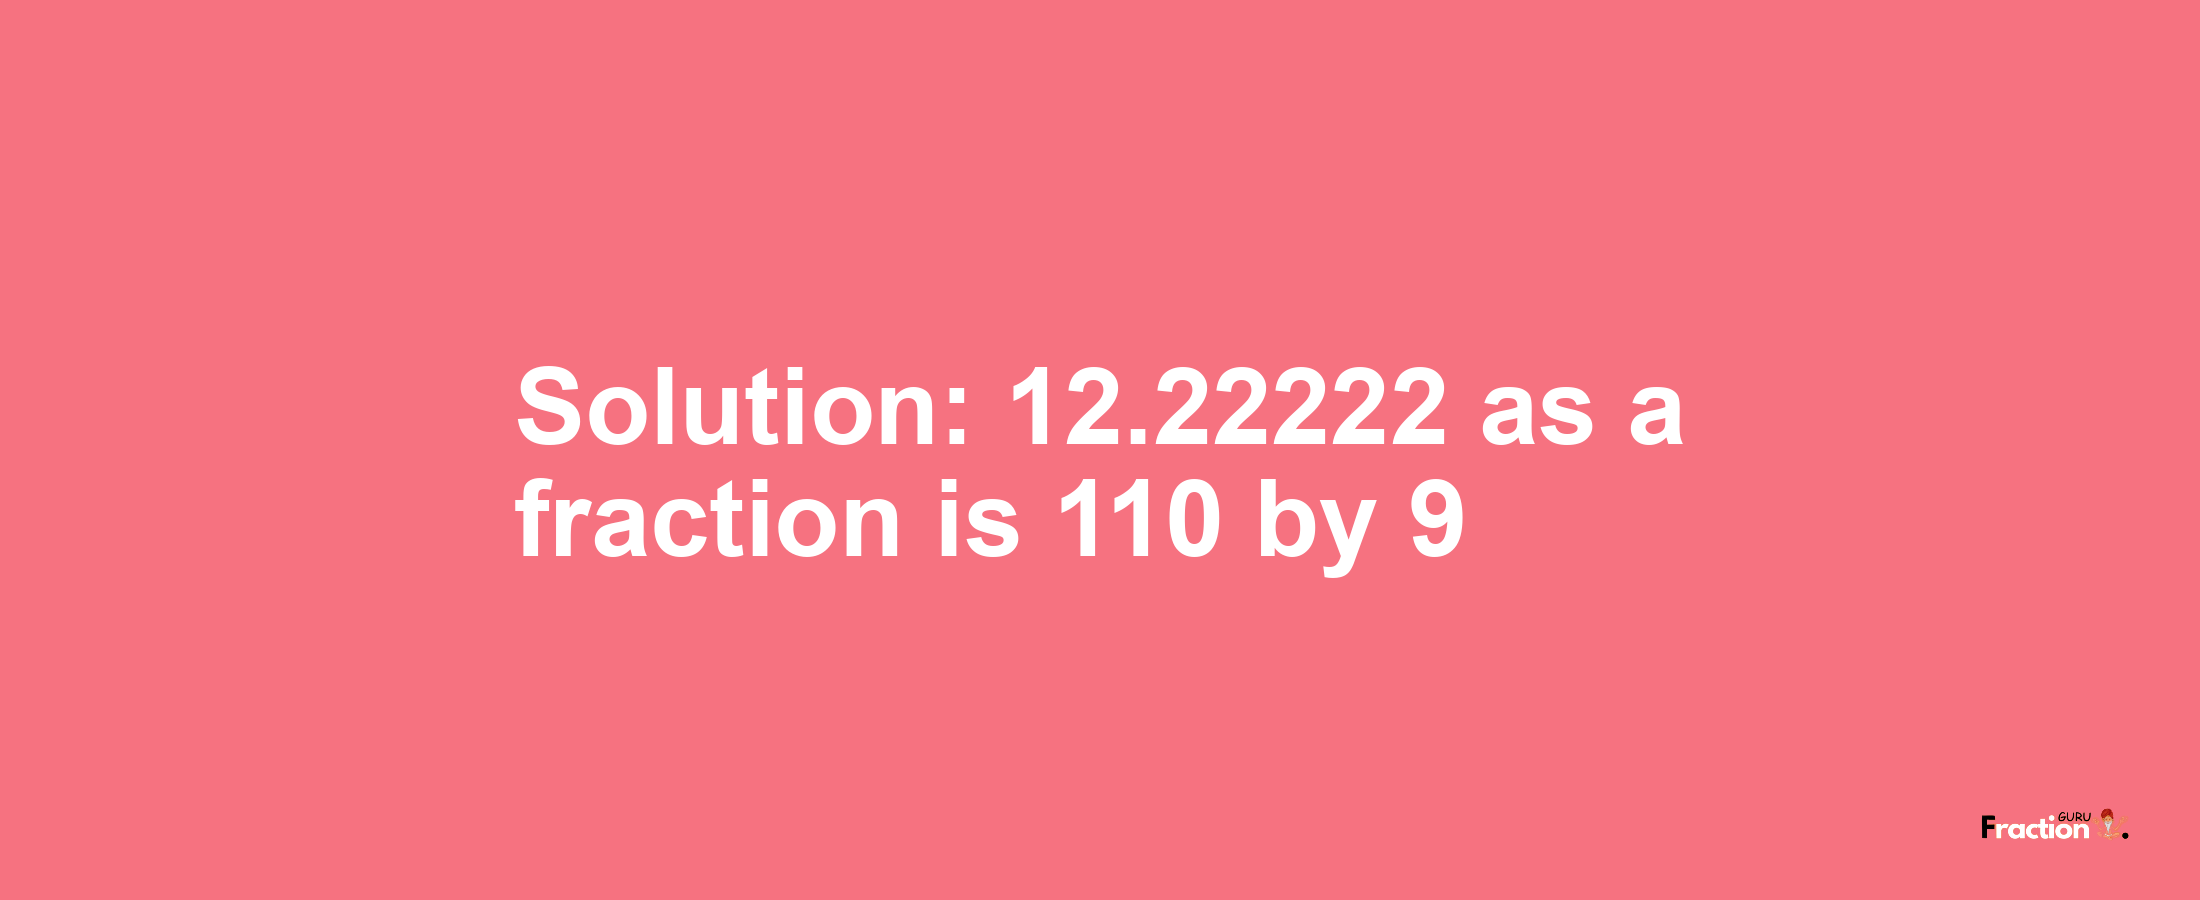 Solution:12.22222 as a fraction is 110/9